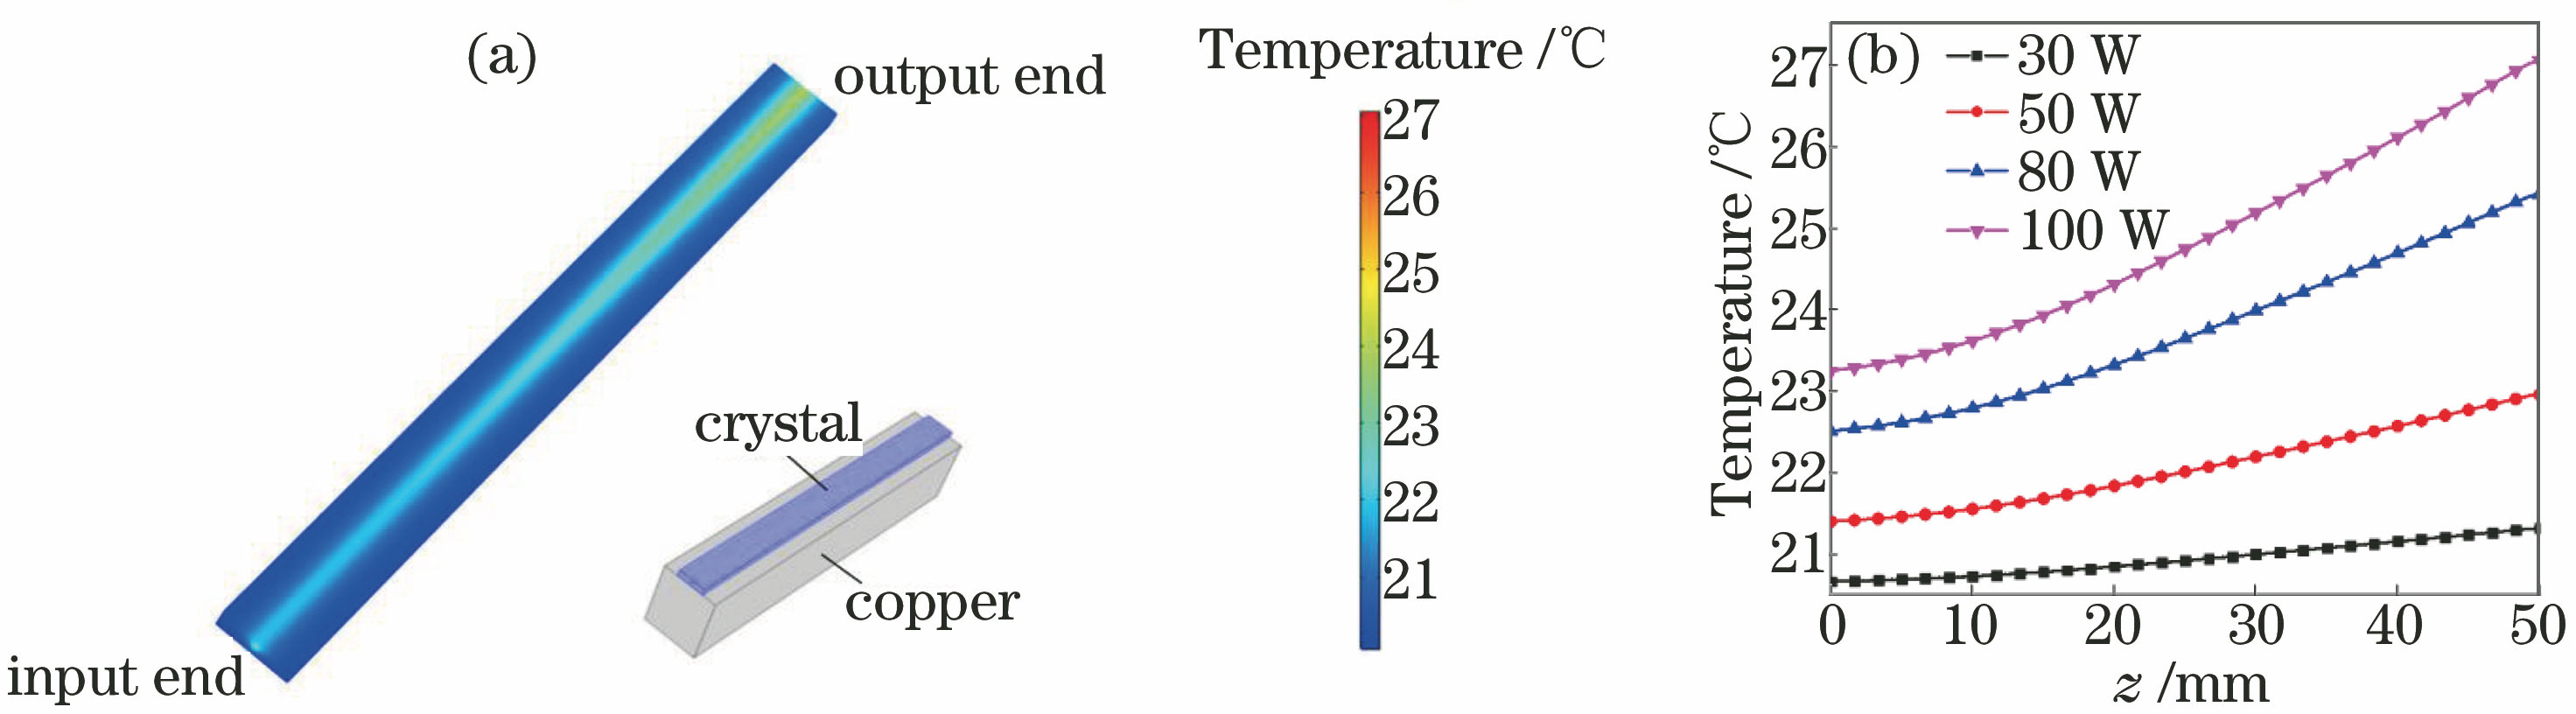 (a) Crystal three-dimensinal temperature distribution with pump power of 100 W; (b) temperature distribution curves along crystal central axis with pump power of 30, 50, 80, 100 W